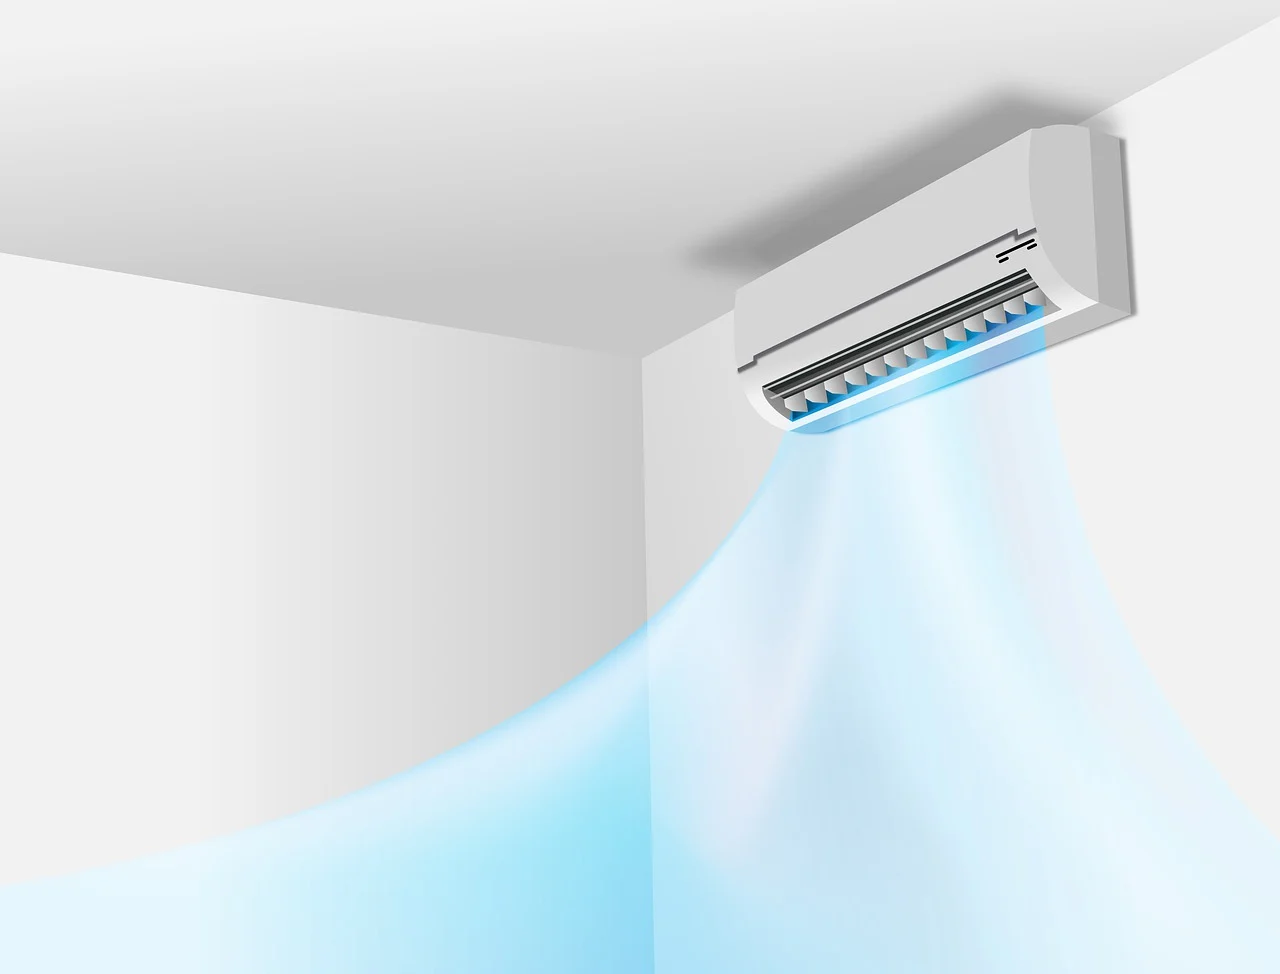 Important Things You Might Not Know About Your AC